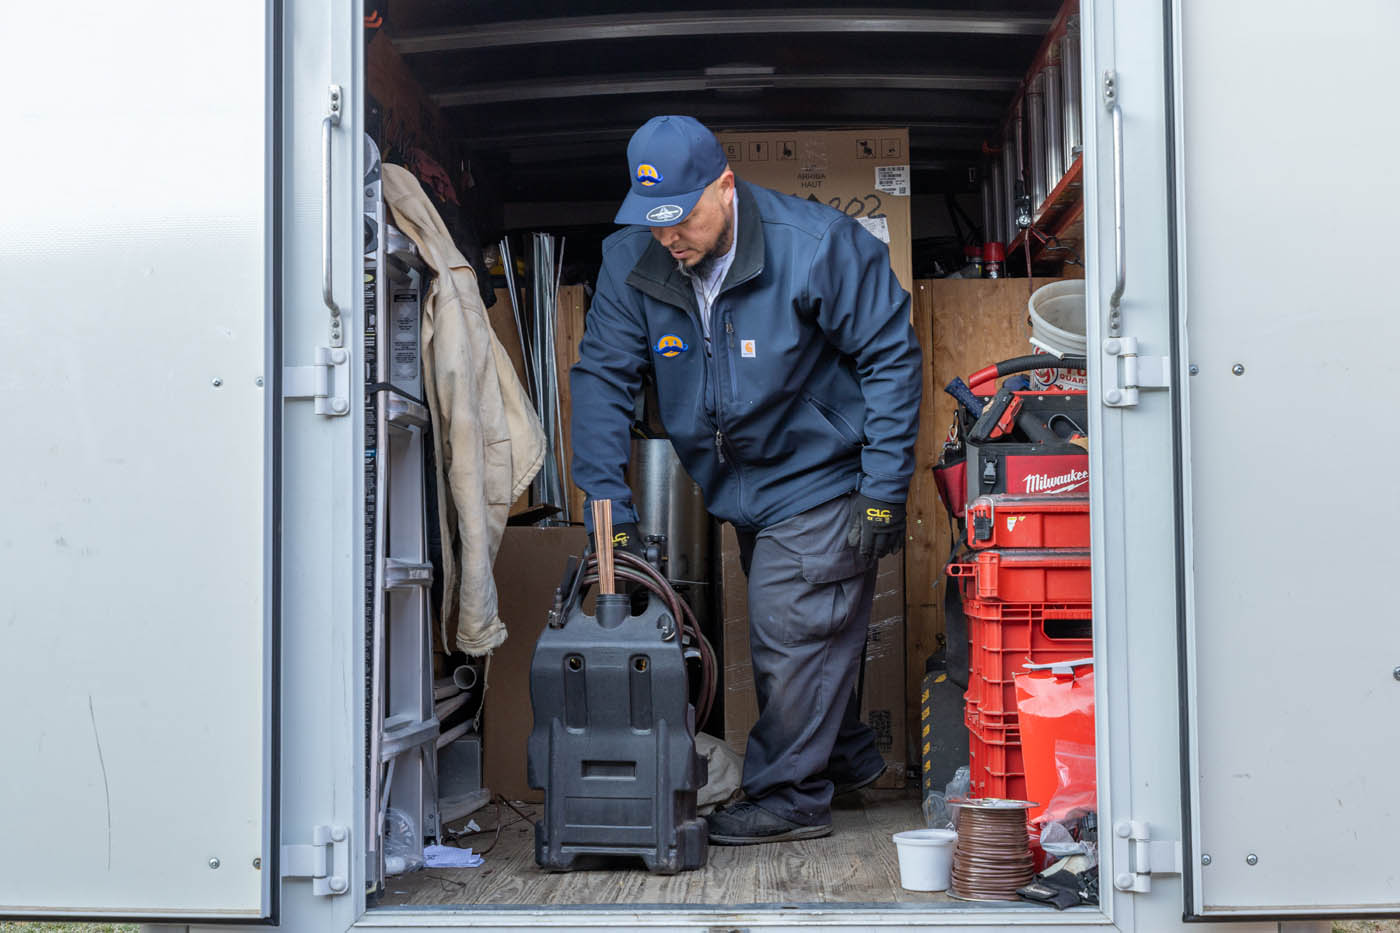 A Absolute Comfort Heating and Air Conditioning employee getting supplies and high-quality products from our service truck.